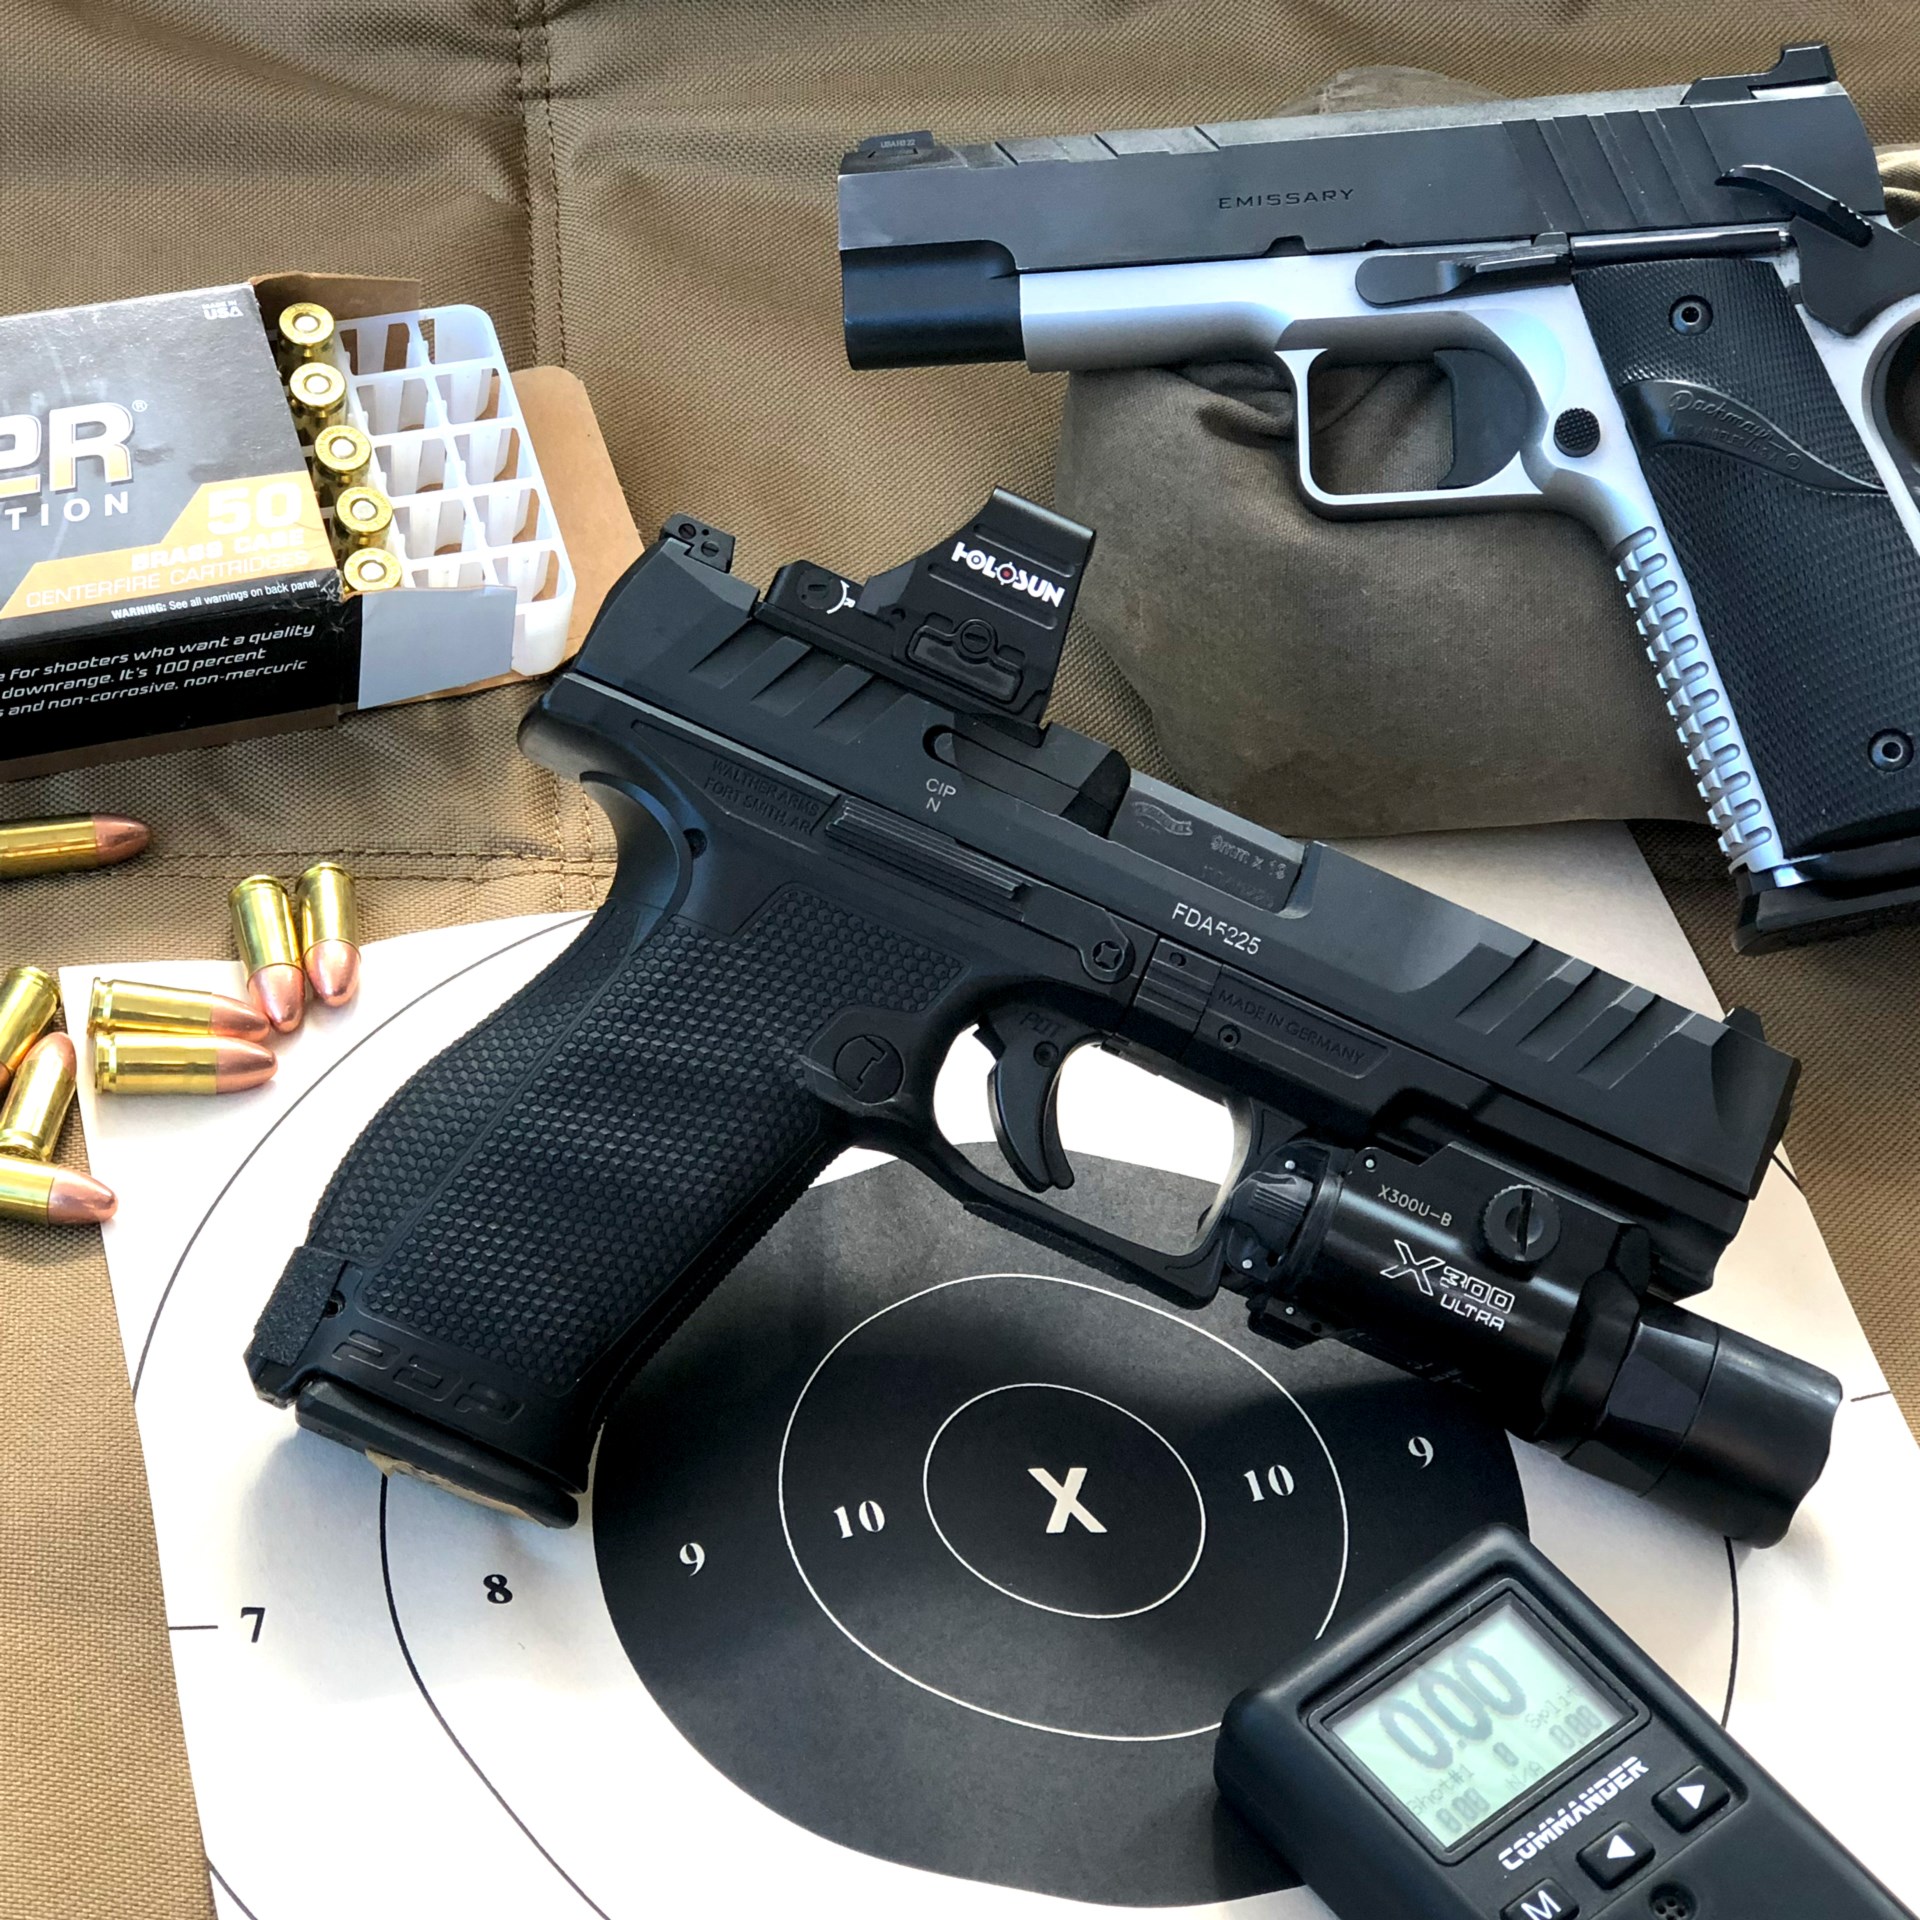 walther pdp pistol with holosun optic foreground emissary pistol 1911 background shown with bullseye target black circle X rings shot timer ammunition box rounds brass cartriges on green blanket mat shooting roll bag support